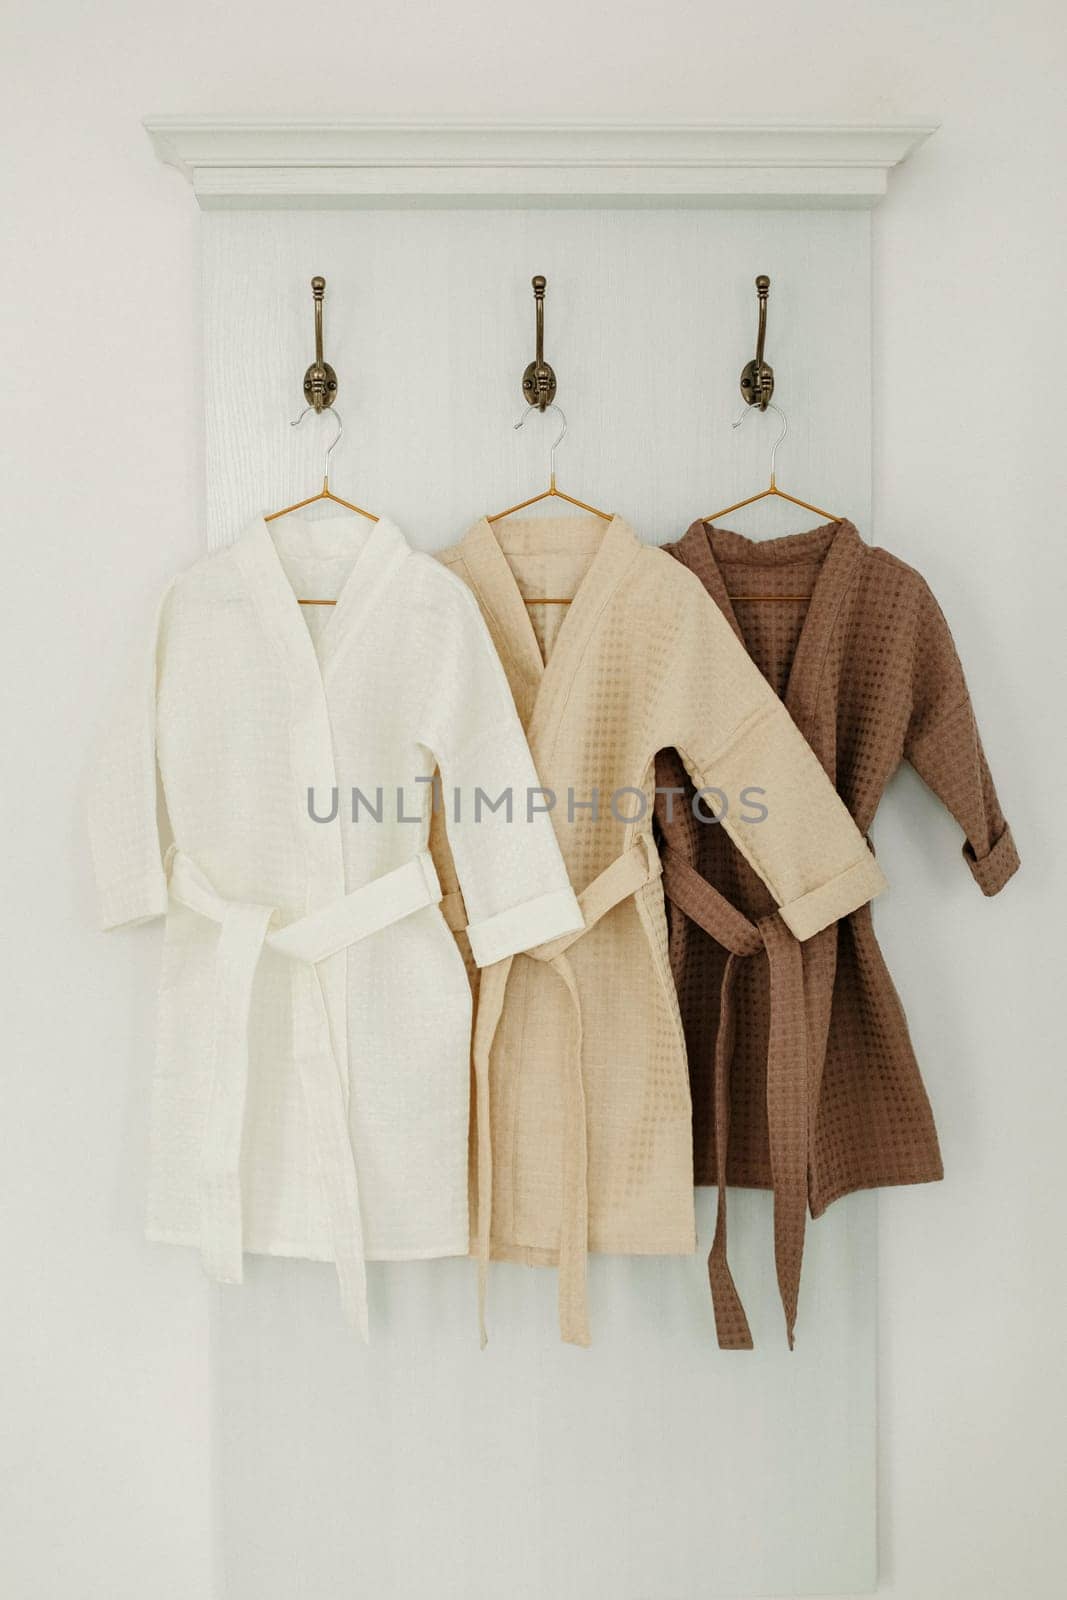 Three linen robes of different colors hang on a hanger in the bathroom. Vertical frame.